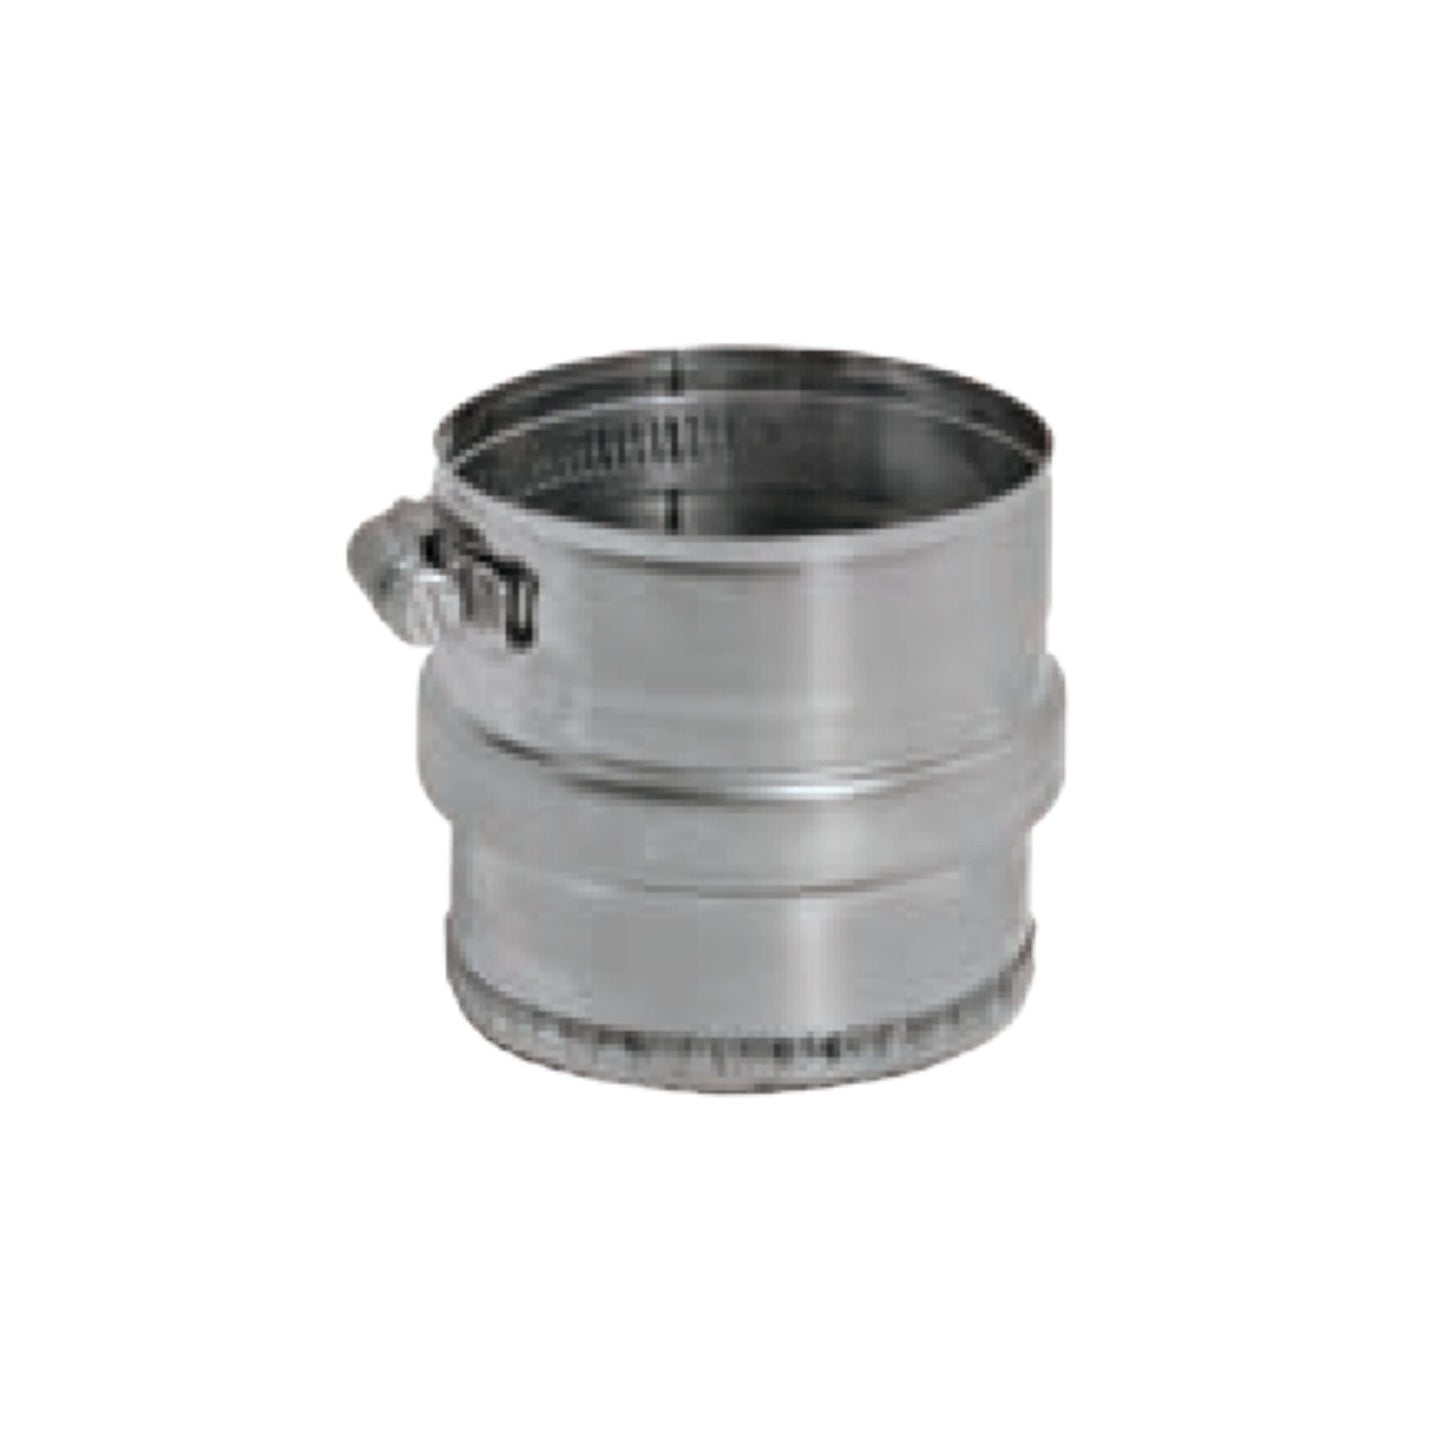 DuraVent FasNSeal 6" 316L Stainless Steel Tee Cap